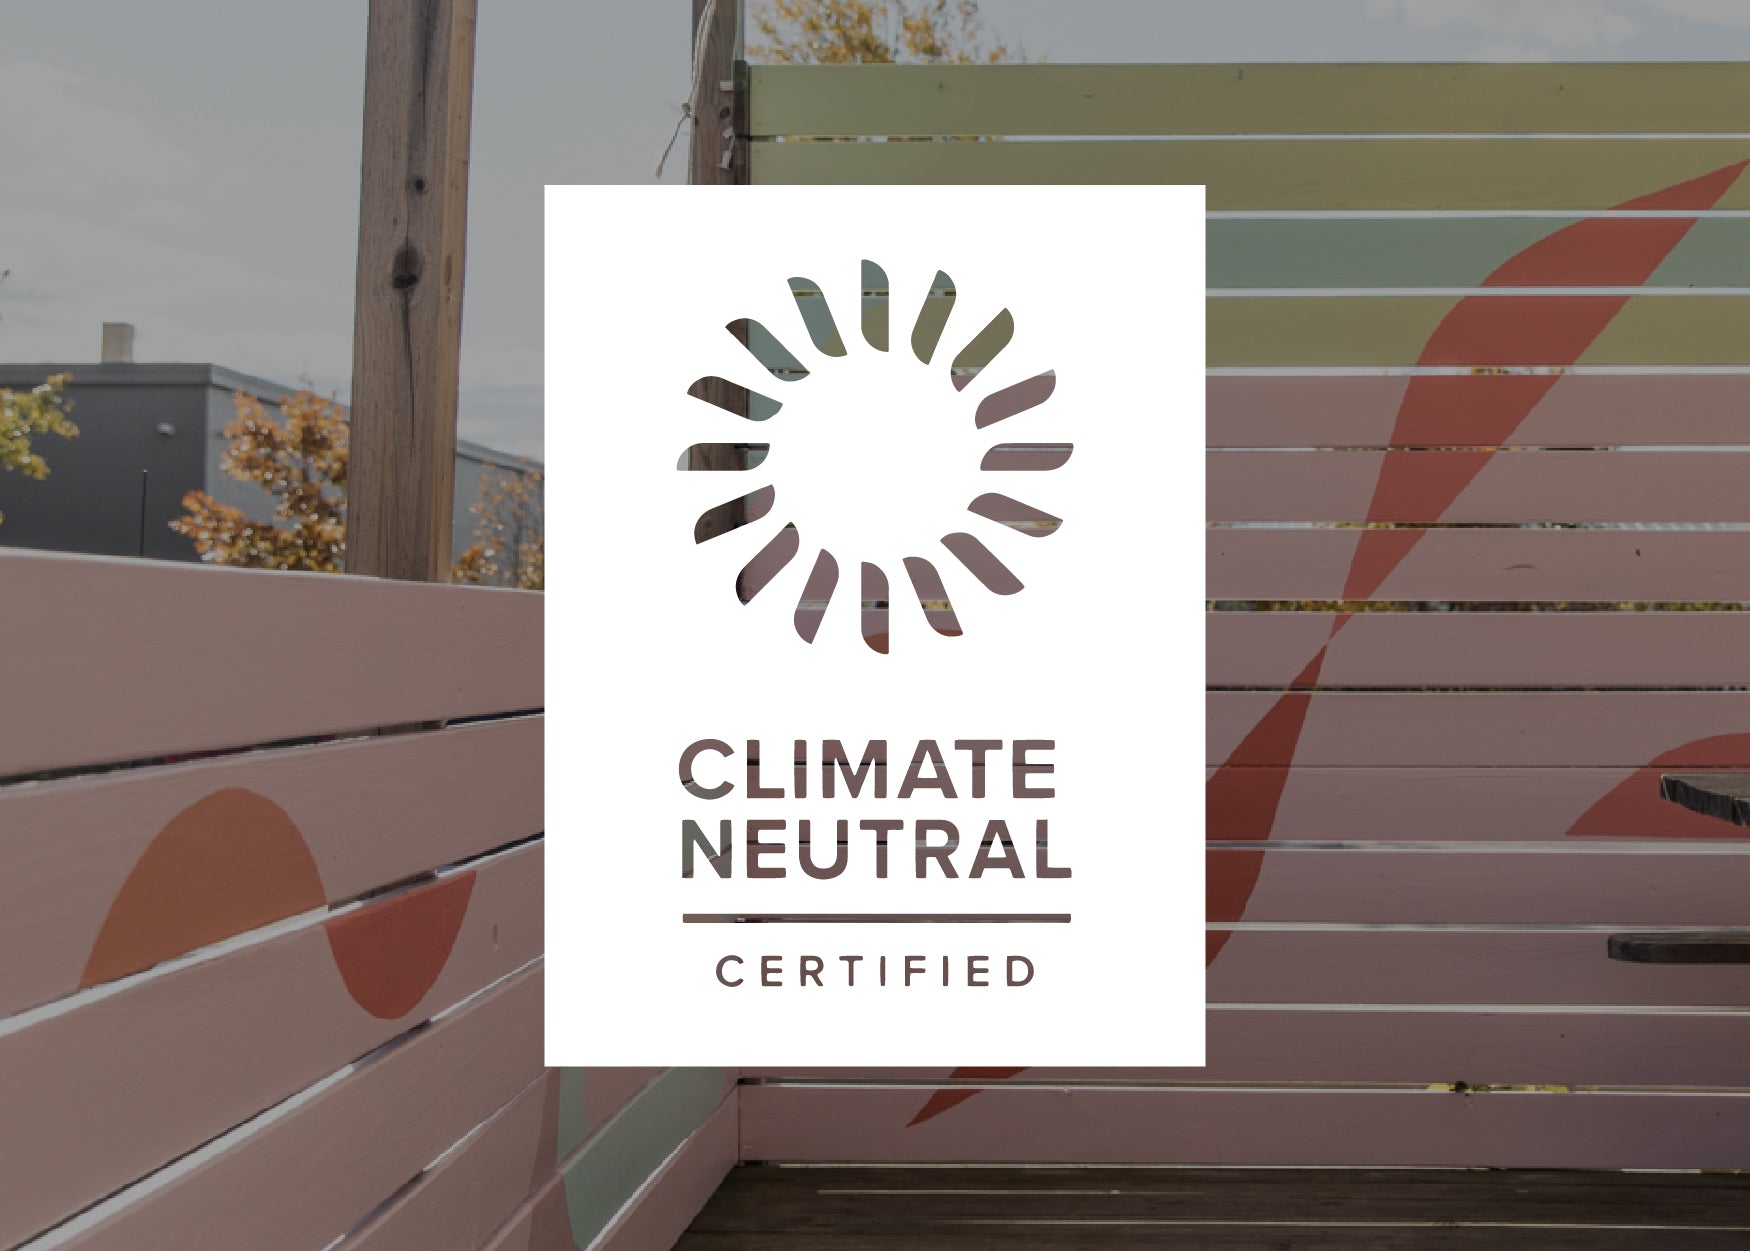 A poster reading "climate neutral certified" with a circular logo, mounted on a wooden bench painted with pastel stripes, against a backdrop of trees and a cloudy sky.